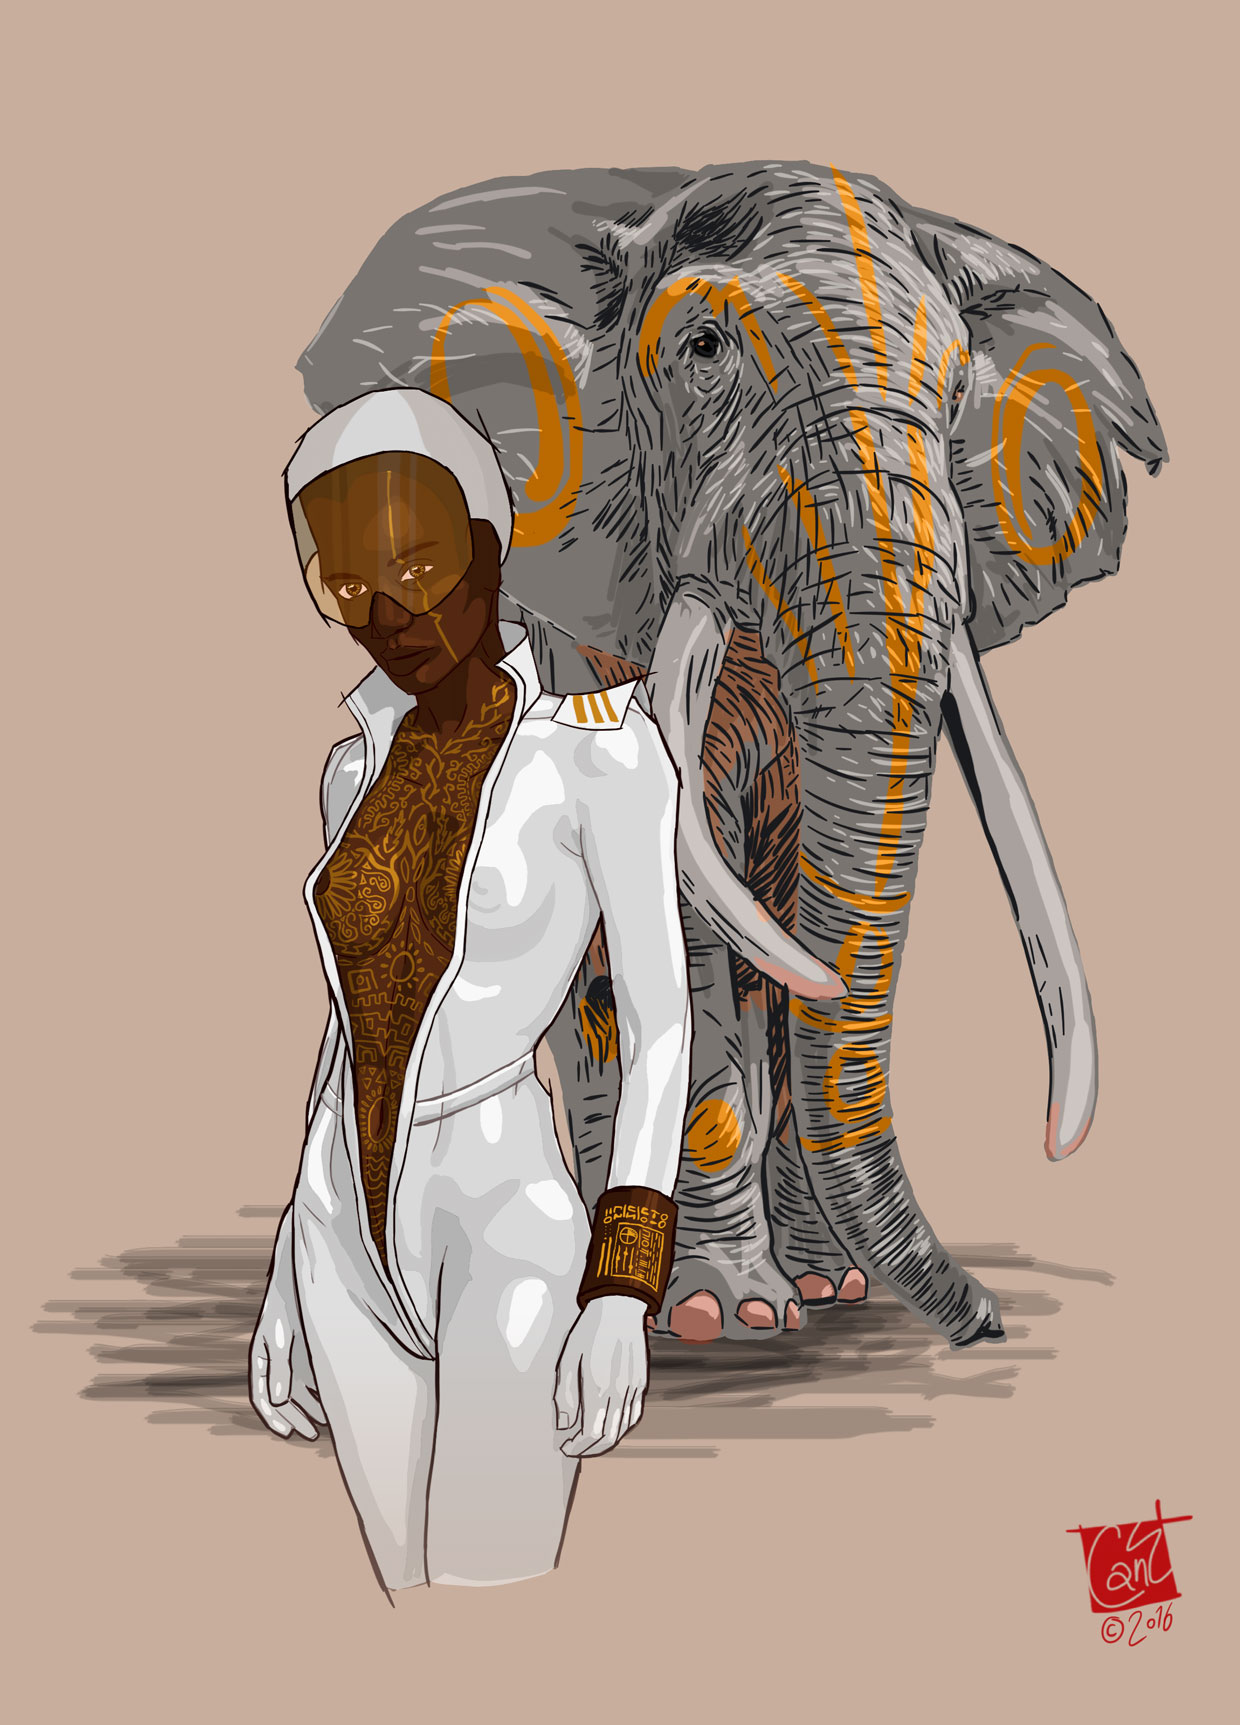 Afrikanzis character design drawings from Can Egridere